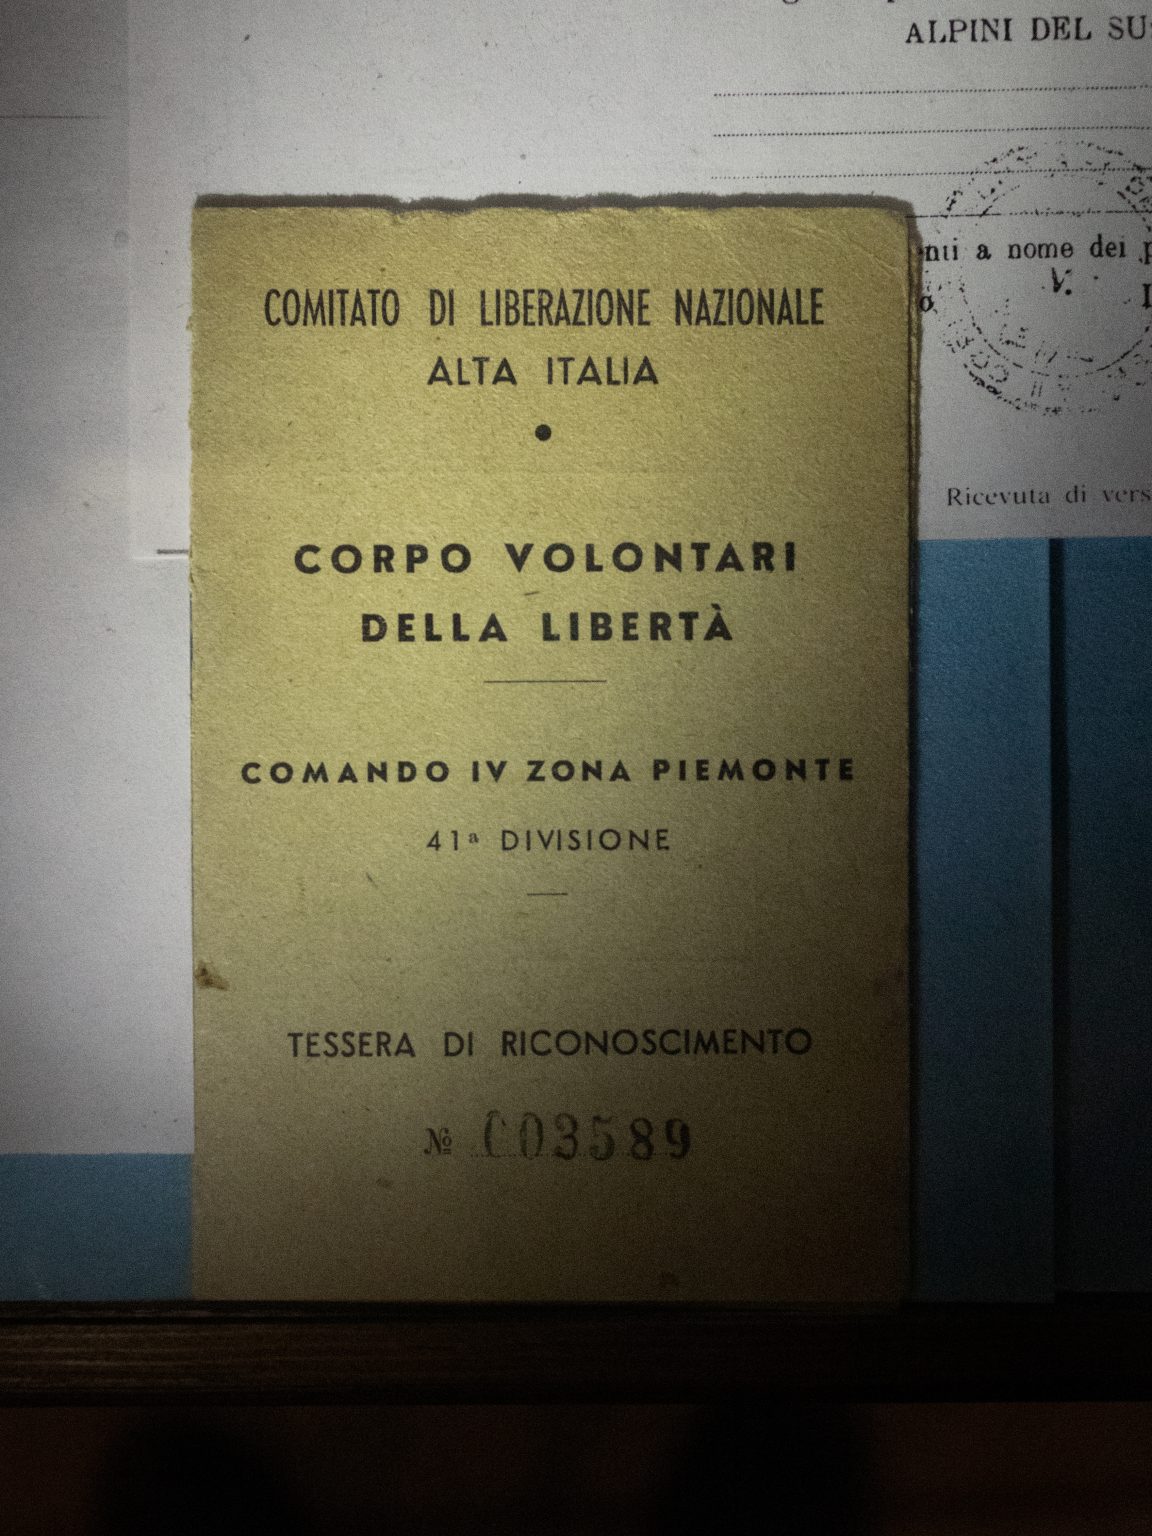 Recognition document of the "Corpo Volontari Della Libertà" (partisans) inside the Resistance museum in Mompantero. The Susa Valley is historically famous for the importance of its partisan movement and the age of the young people who joined the movement corresponds to the age of the young people who are joining the "Giovani No Tav" movement today.
Monpantero (Turin), Italy, March 2022. 

><

Documento di riconoscimento dei Corpo Volontari Della Libertà (dei partigiani) allinterno del museo di Resistenza di Mompantero. La Valle di Susa è storicamente famosa per limportanza del suo movimento partigiano e letà dei ragazzi che ne entravano a far parte corrisponde alletà dei giovani che oggi si uniscono al movimento Giovani No Tav. 
Monpantero (Torino), Italia, marzo 2022